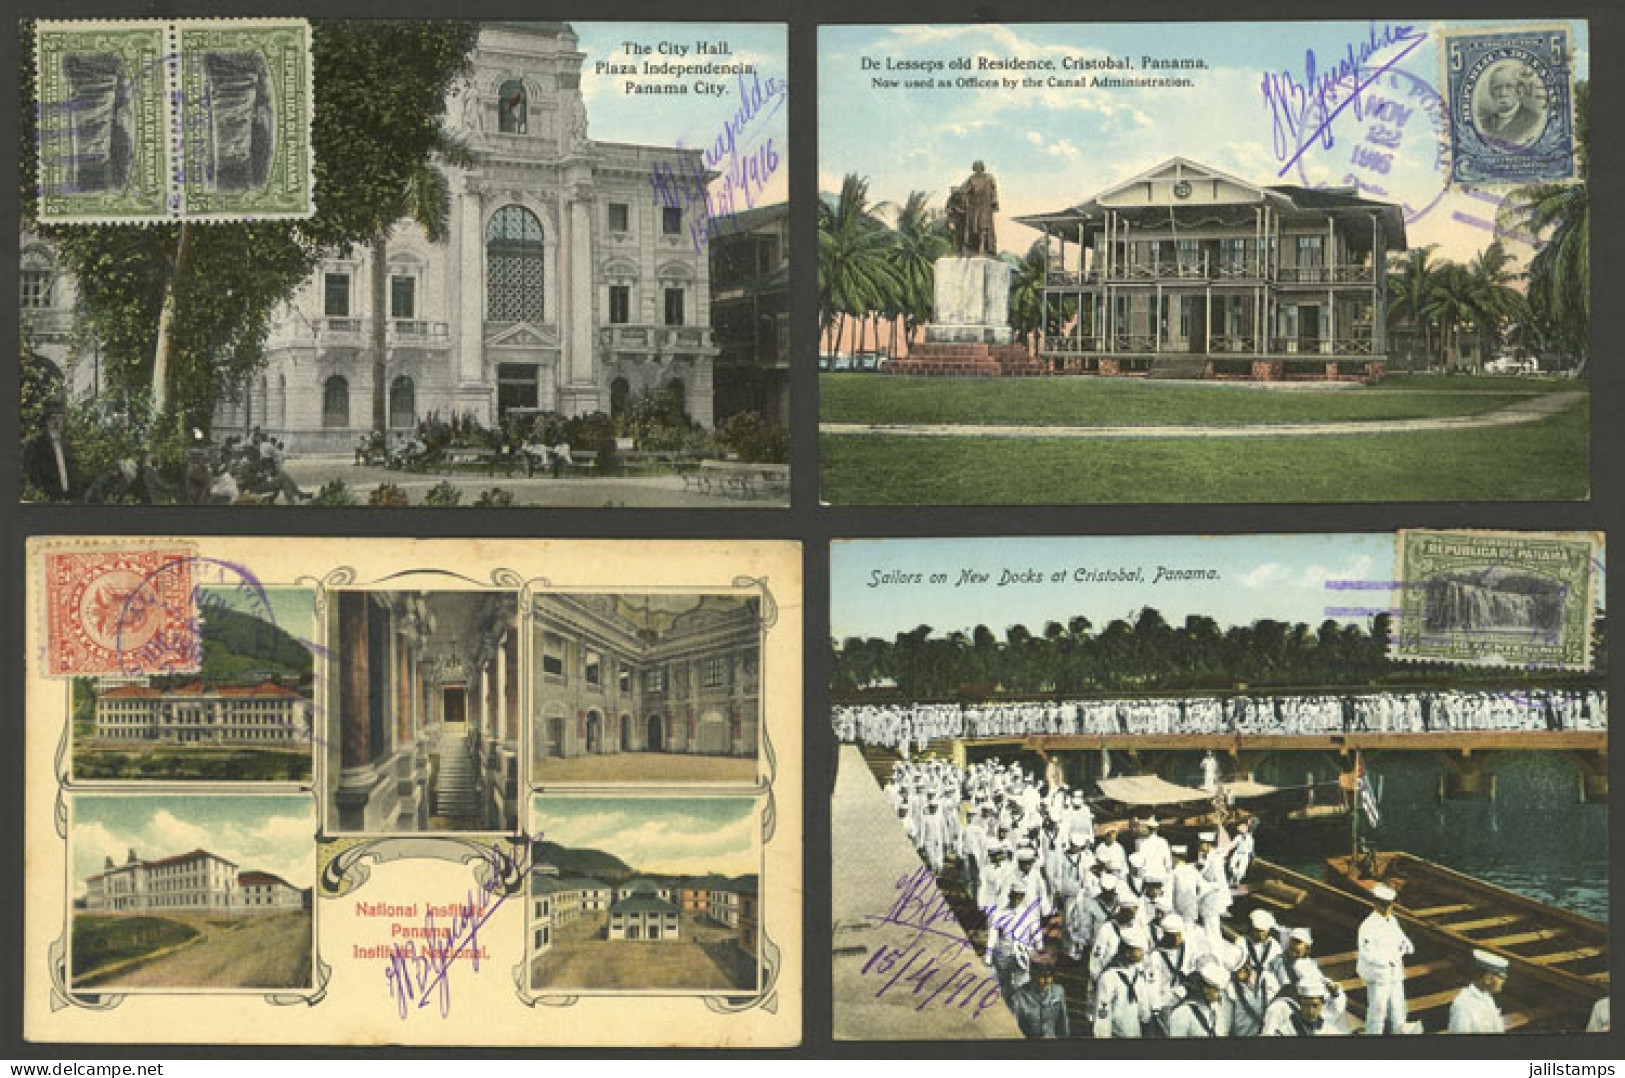 PANAMA: 13 Old Postcards With Very Good Views, Sent To Argentina In 1916 With Nice Postages And Cancels, Very Fine Gener - Panama